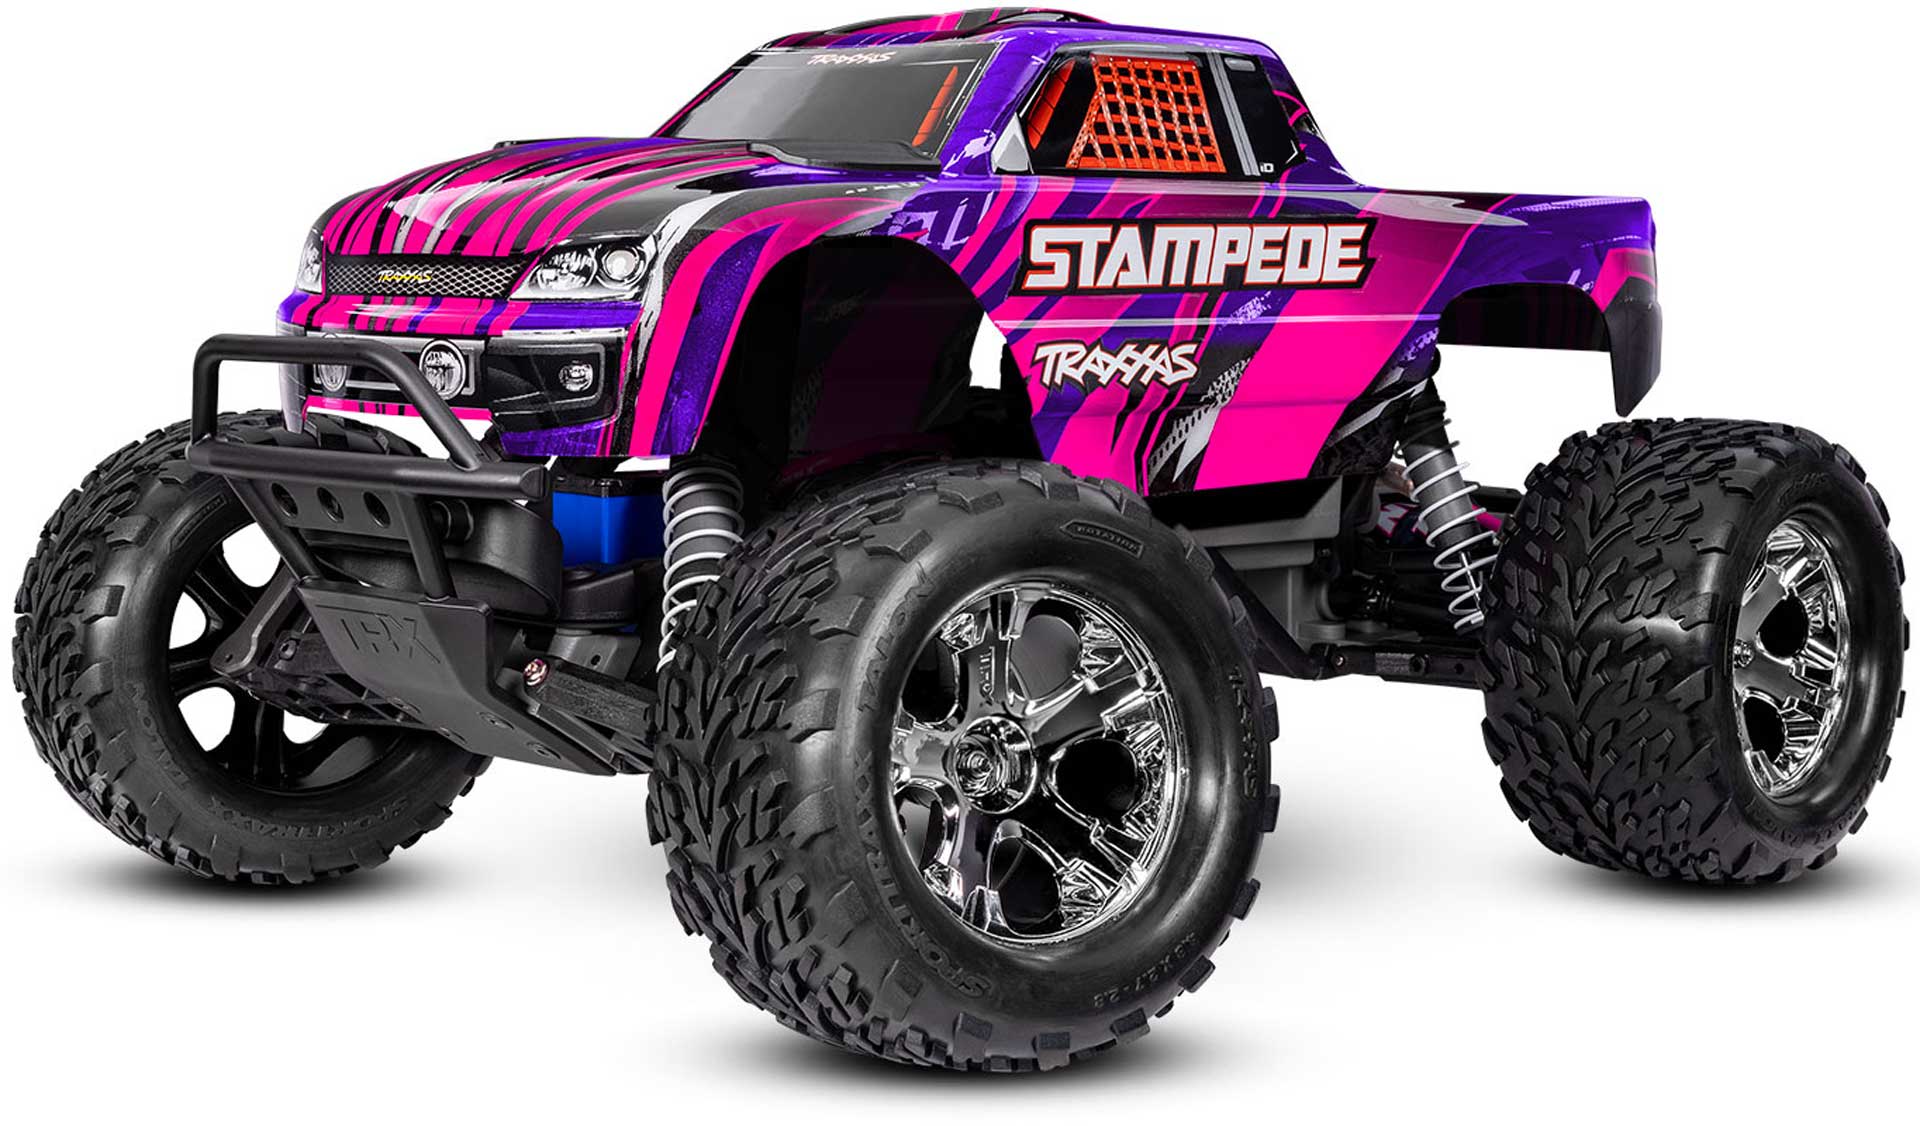 TRAXXAS STAMPEDE PINK 1/10 2WD MONSTER-TRUCK RTR RTR BRUSHED, HD, WITH BATTERY AND 4AMPER